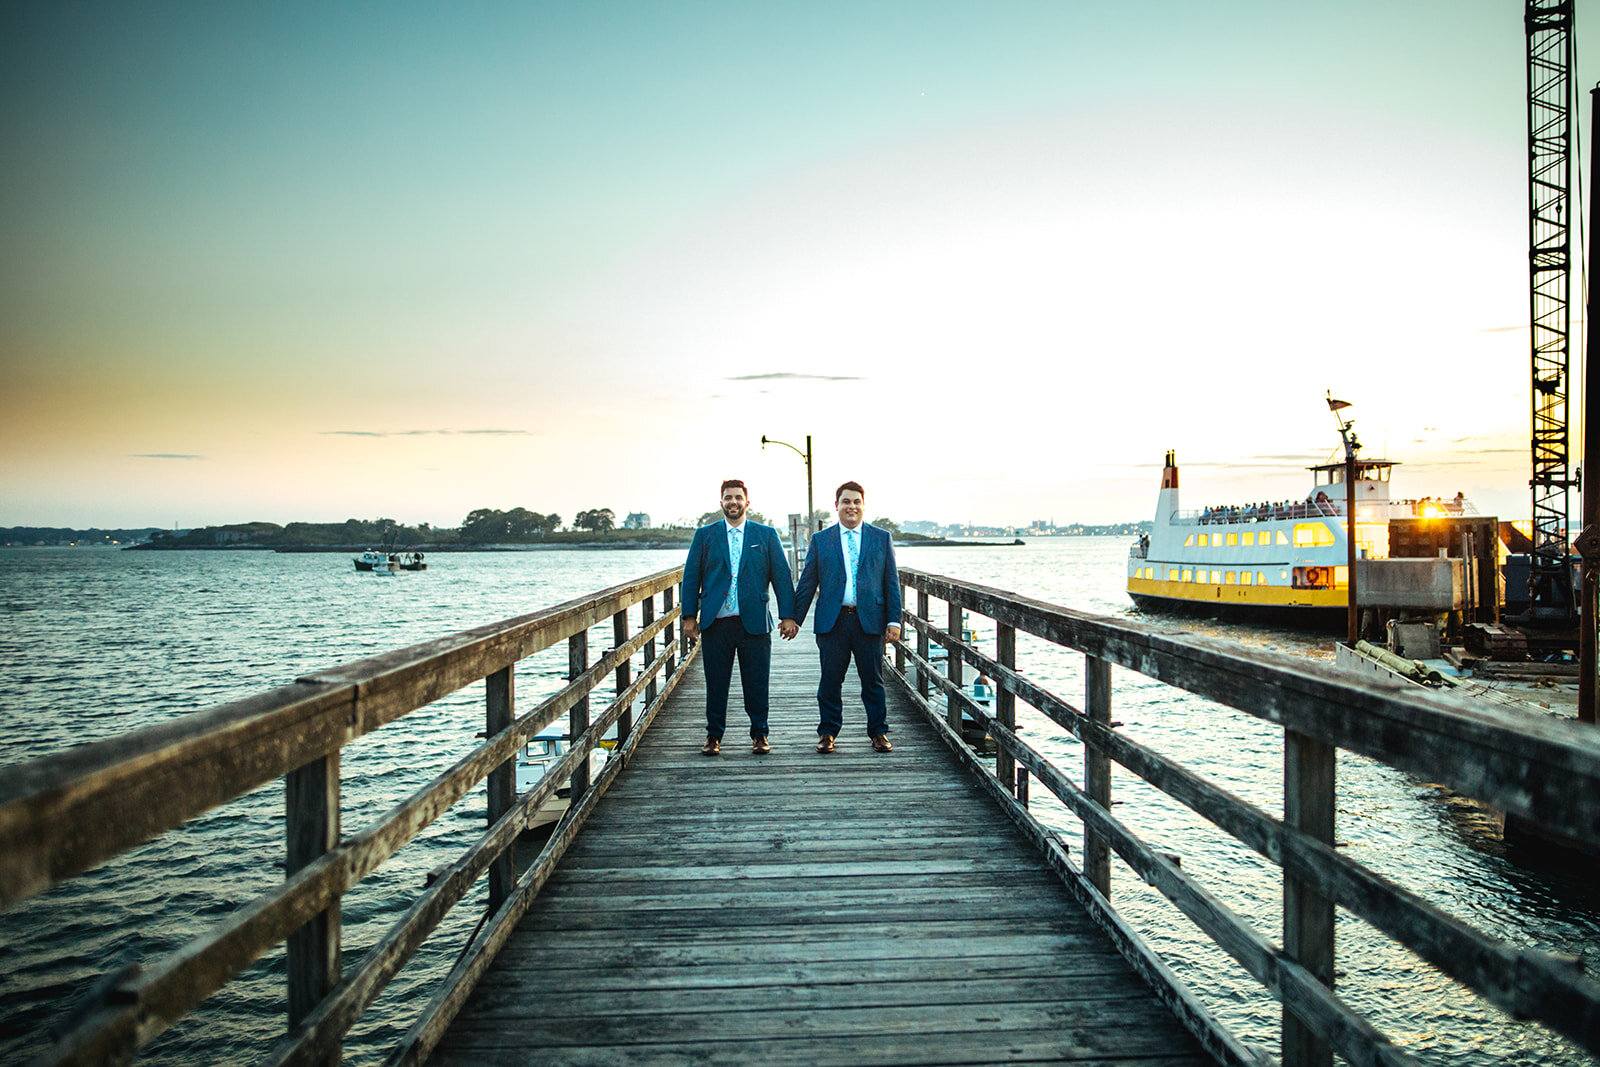 Newly married queer couple holding hands on a pier in Portland ME Shawnee Custalow wedding photography